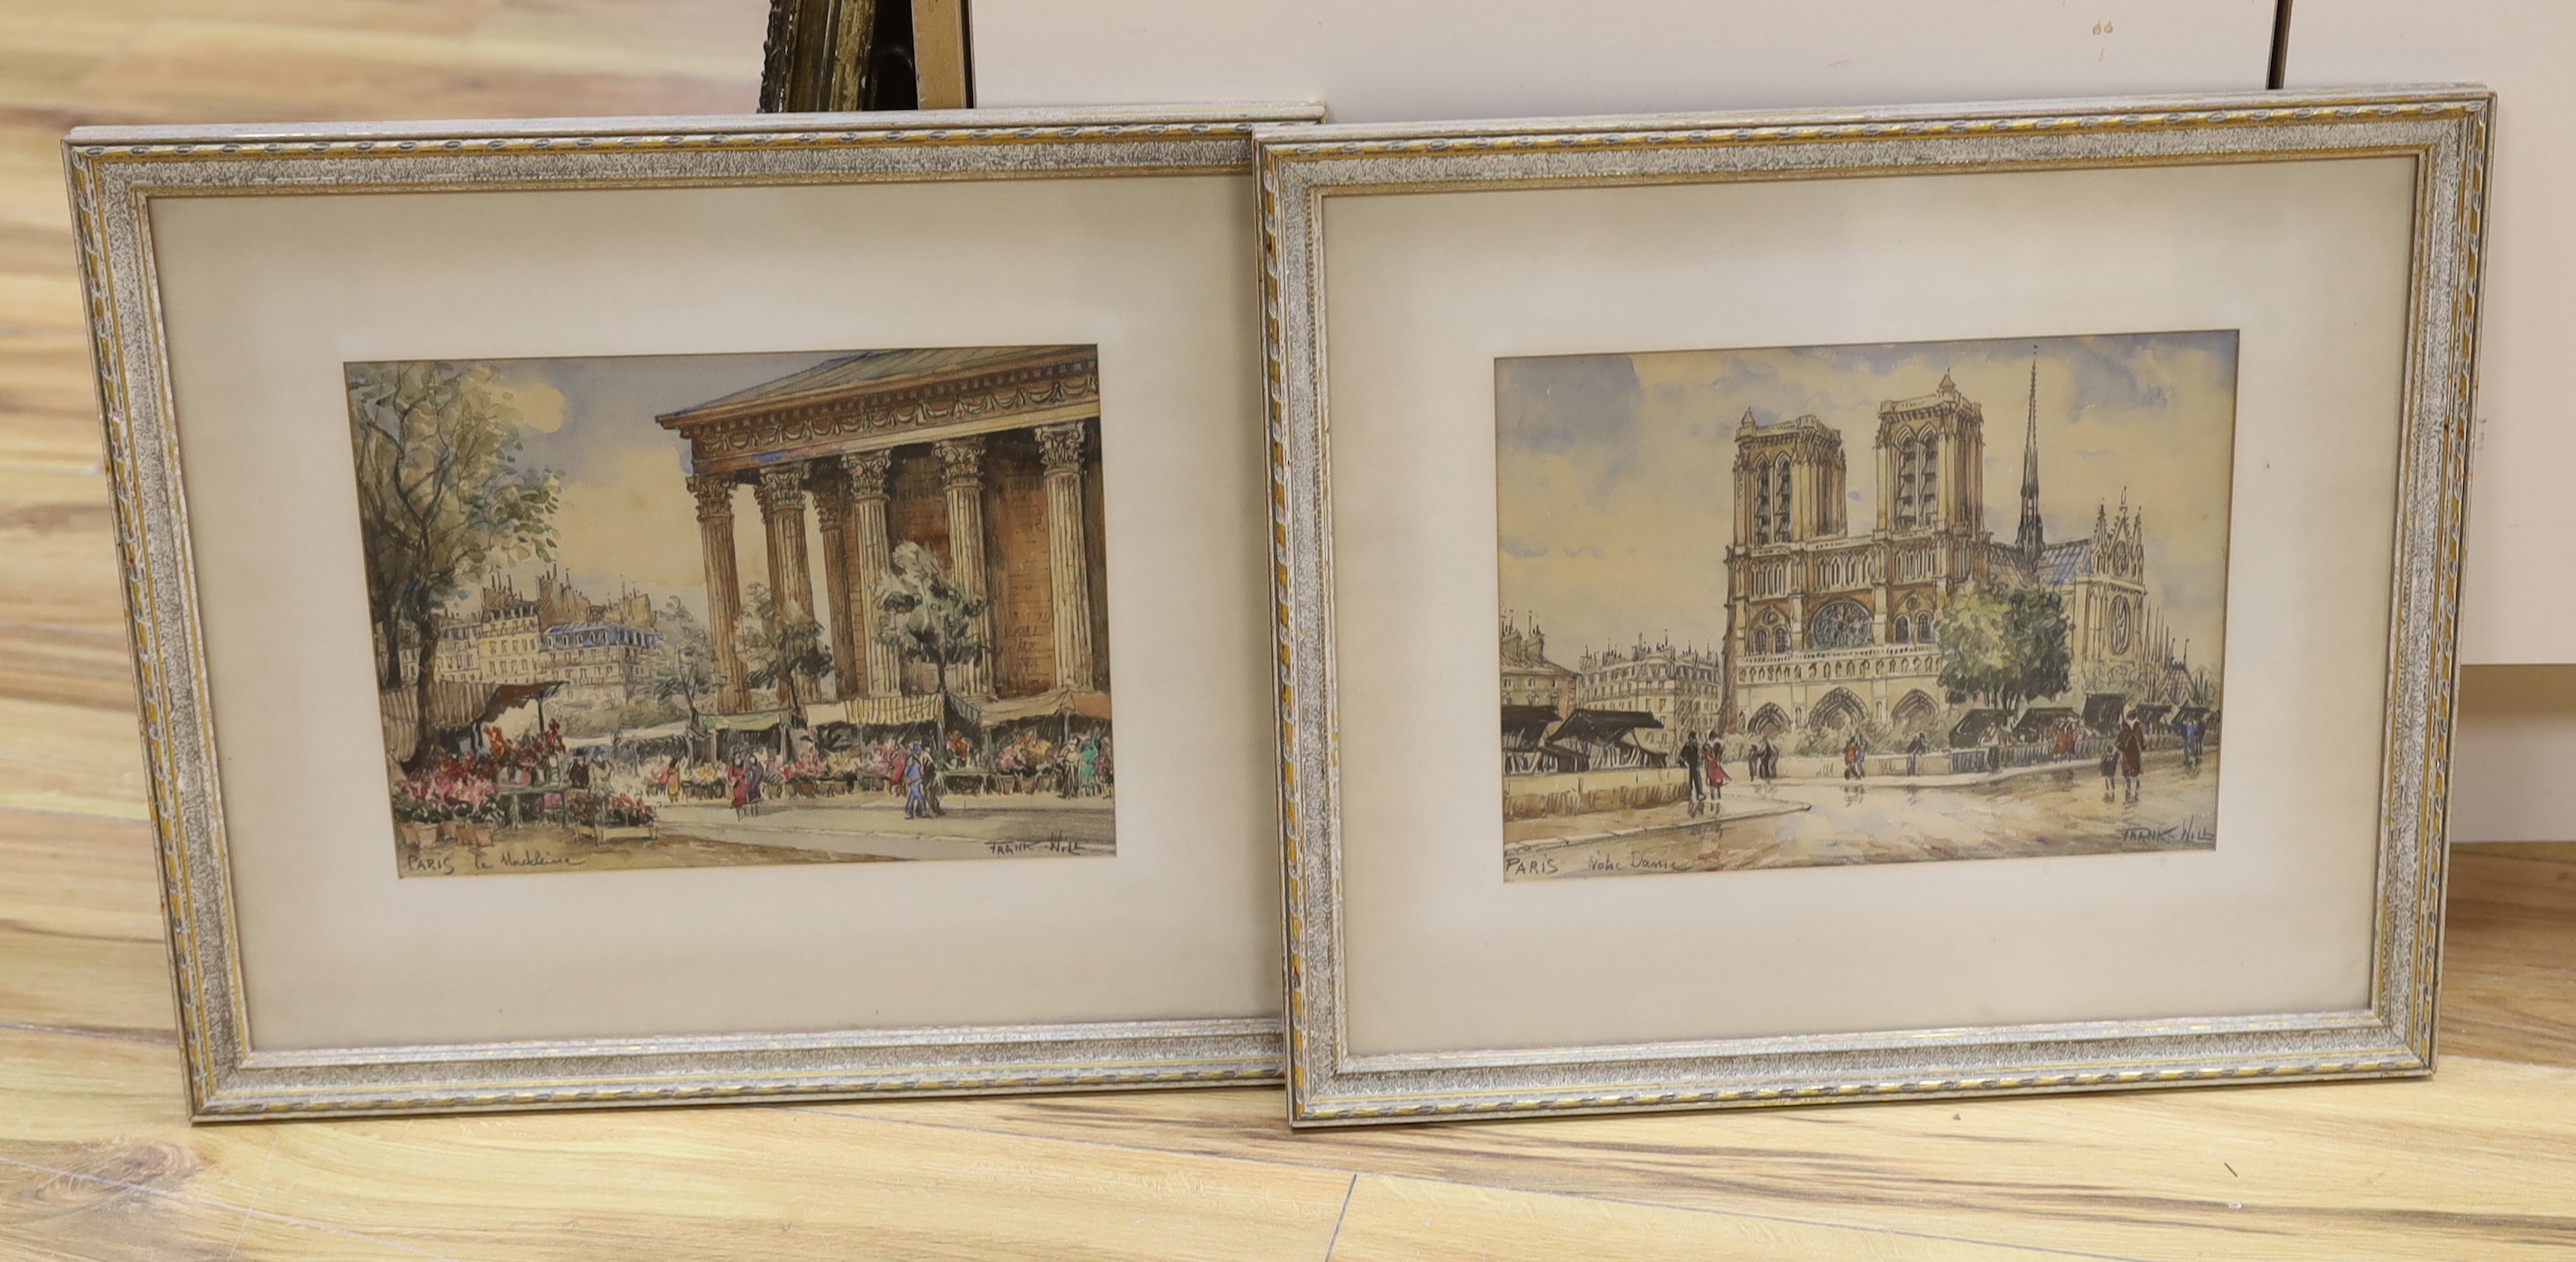 Frank William Boggs (1900-1950), pair of ink watercolours, Parisian scenes, ‘Notre Dame’ and ‘La Madeleine’, each signed, 22 x 28cm